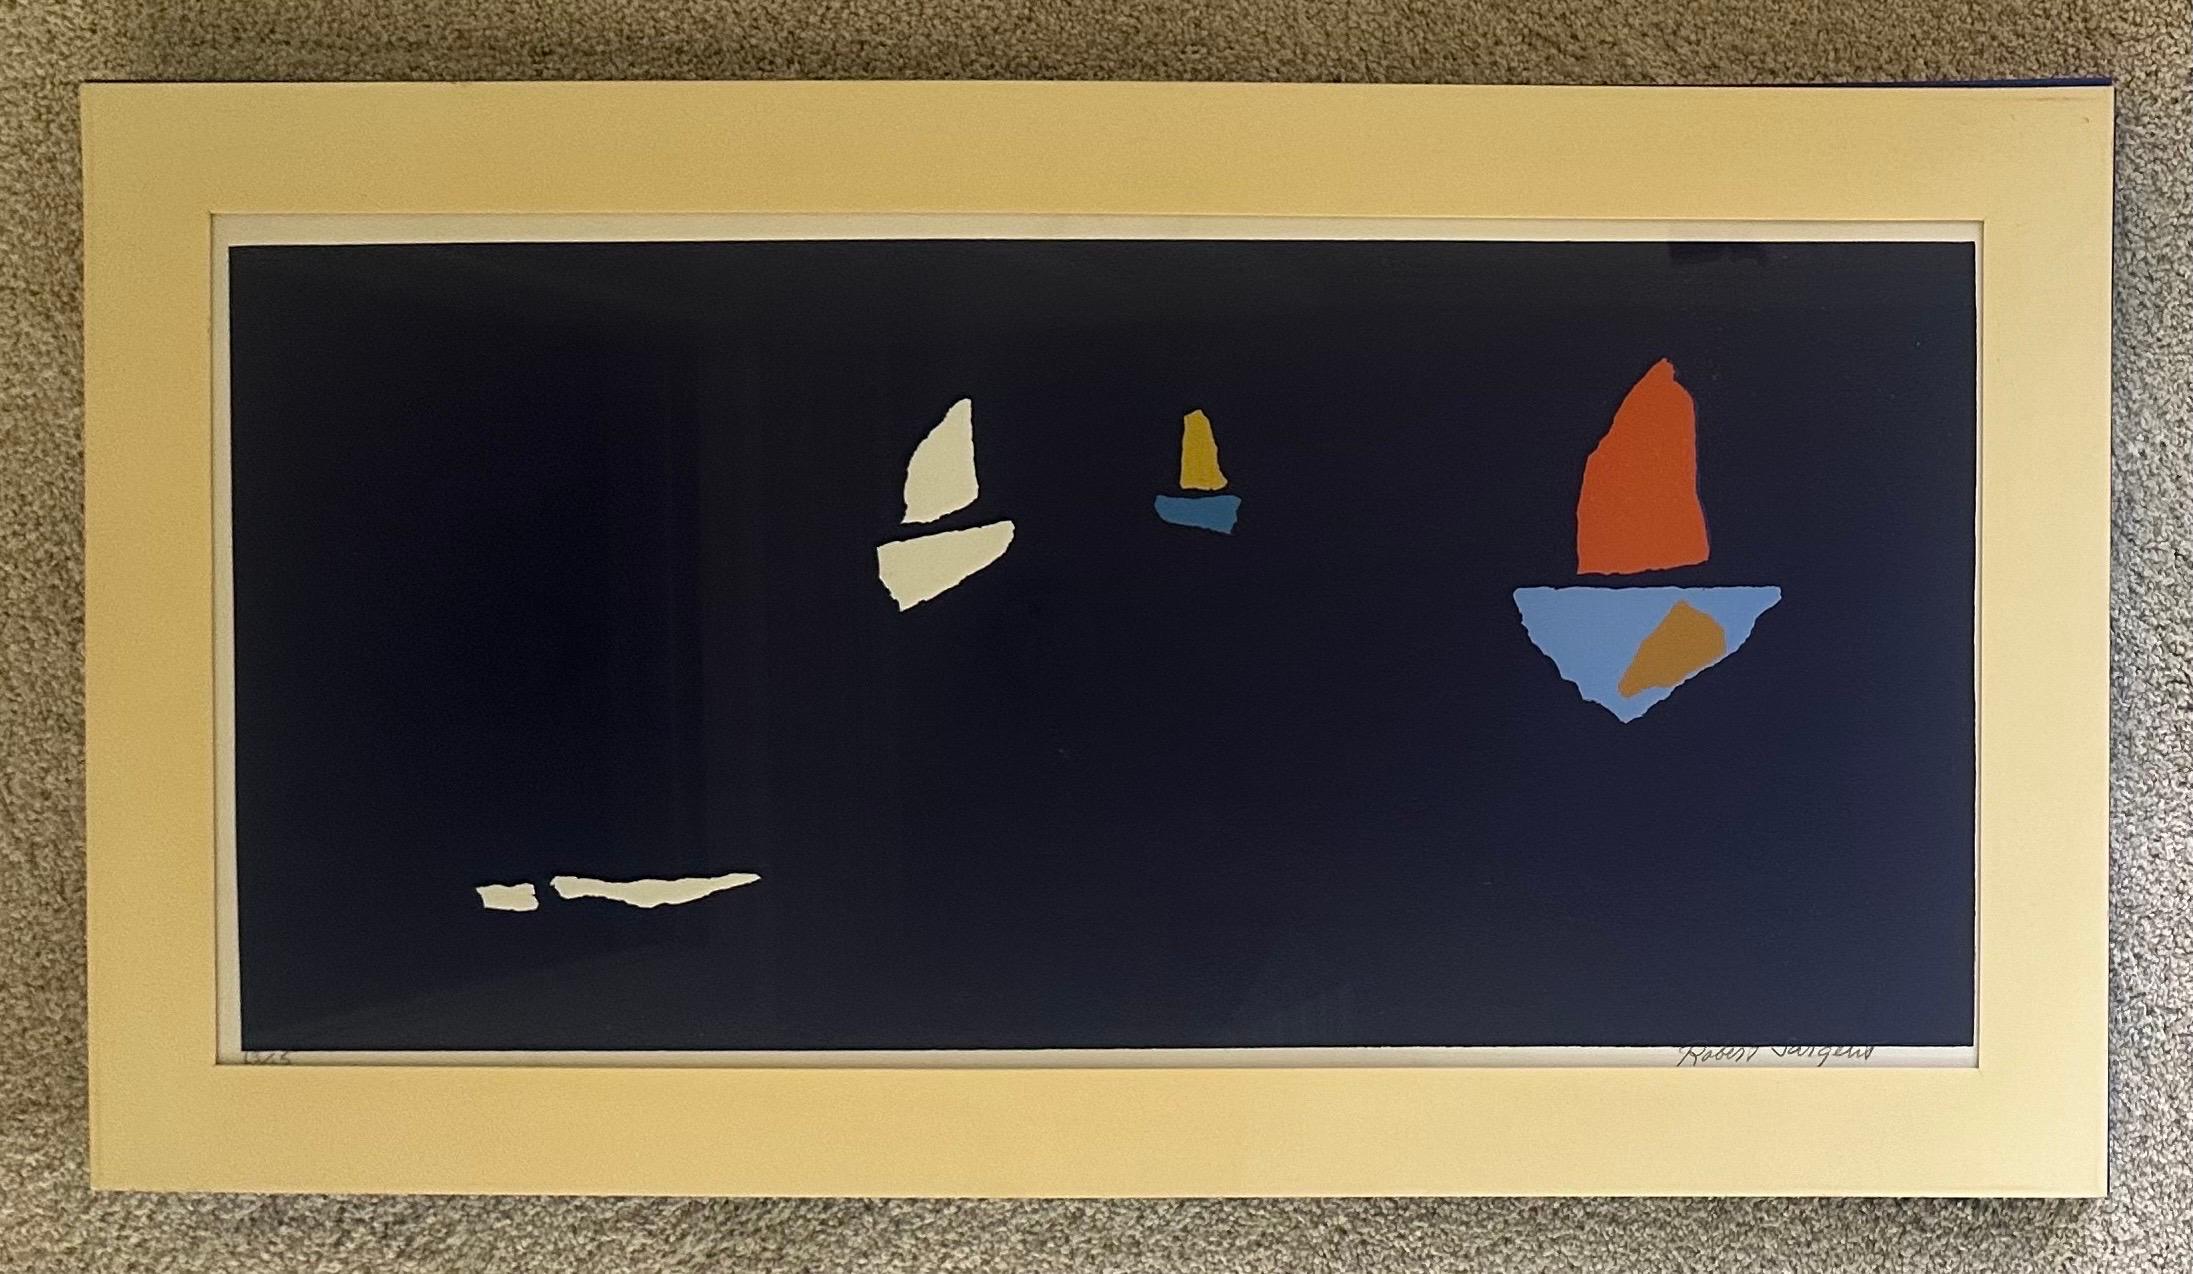 An abstract serigraph of sailboats on the horizon by Robert Sargent, circa 1970s. The work is signed in the lower right and is numbered 63 of 65 in the lower left. Overall dimensions are 31.25